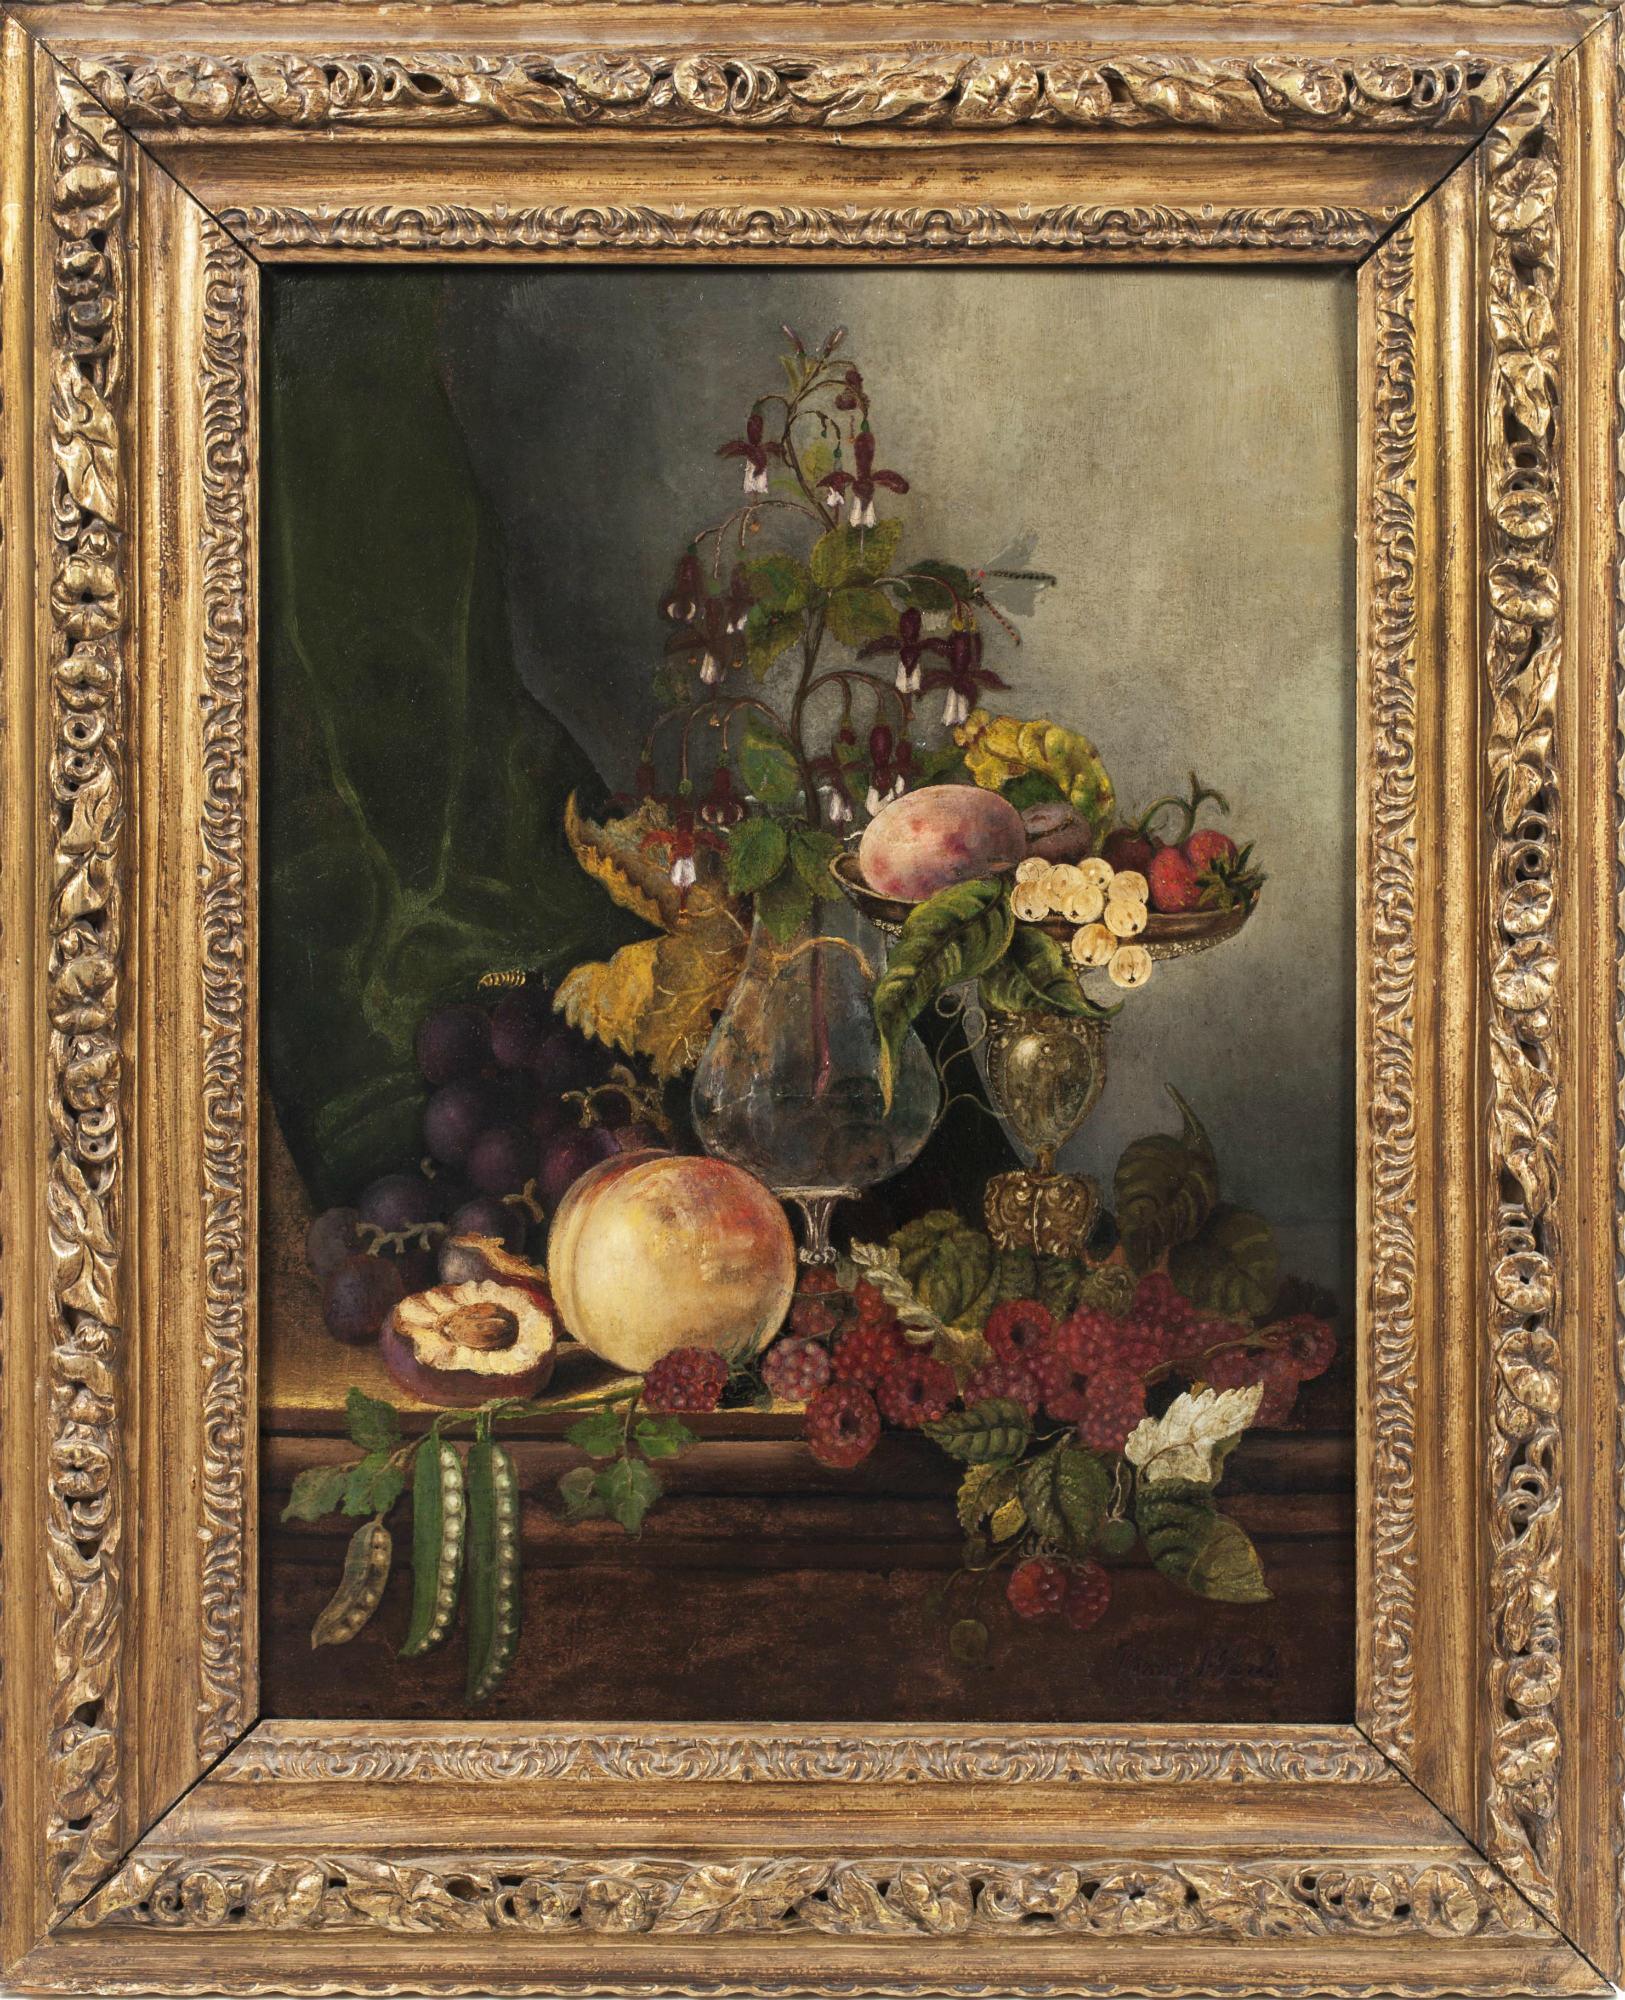 Still-Life with Fruit and Flowers by Historic Woman Artist Mary Jane Peale (1827-1902, American)

Mary Jane Peal (1827-1902)
Still-Life with Fruit and Flowers
Oil on board
20 x 15 inches
Signed lower right

Mary Jane Peale was the daughter of Rubens